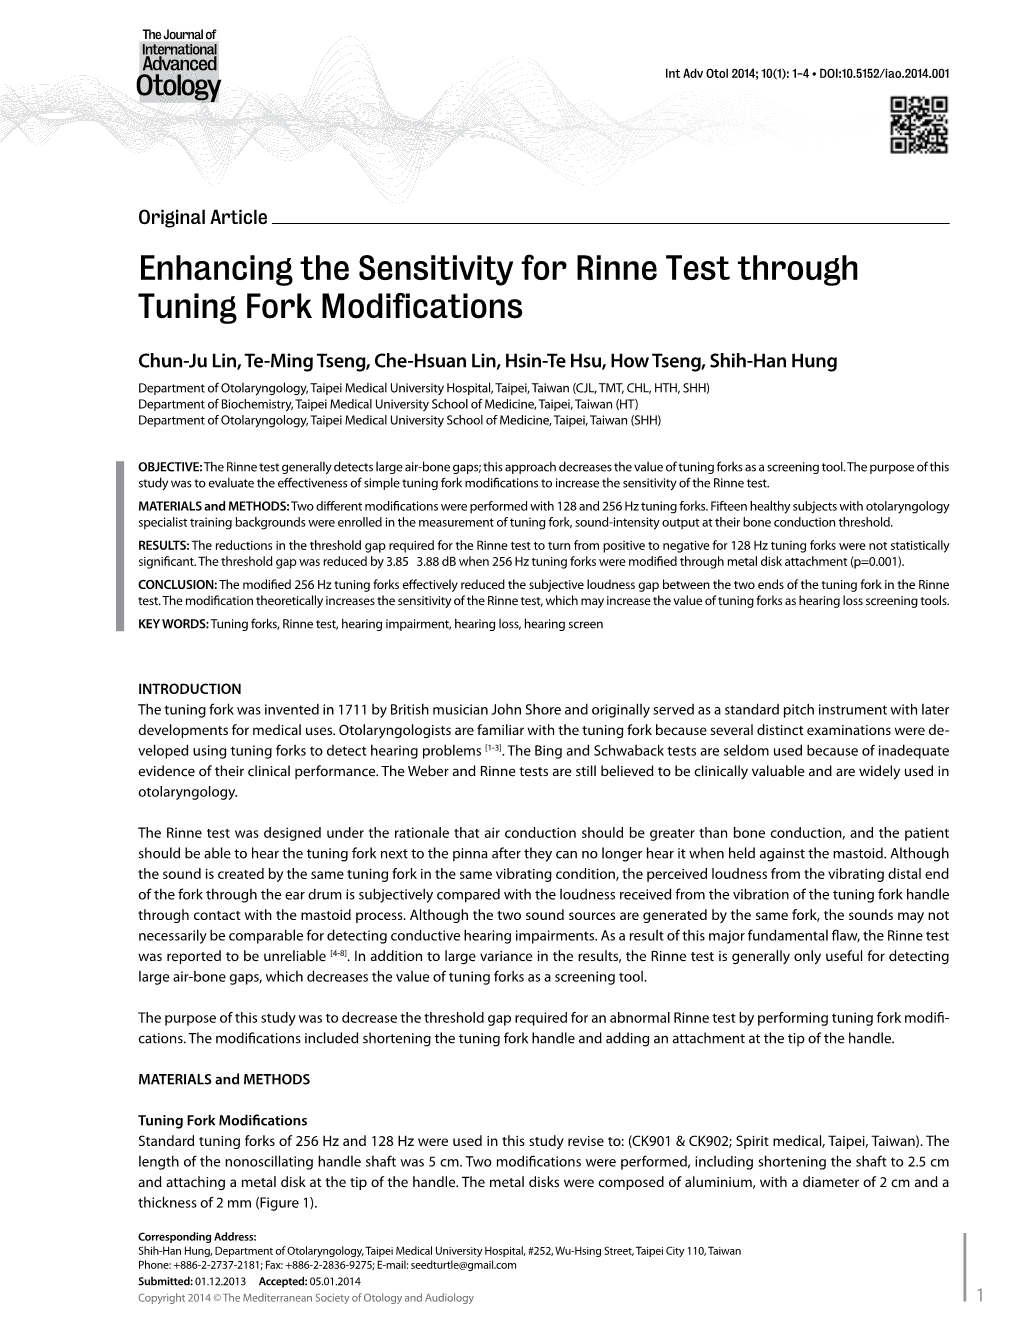 Enhancing the Sensitivity for Rinne Test Through Tuning Fork Modifications